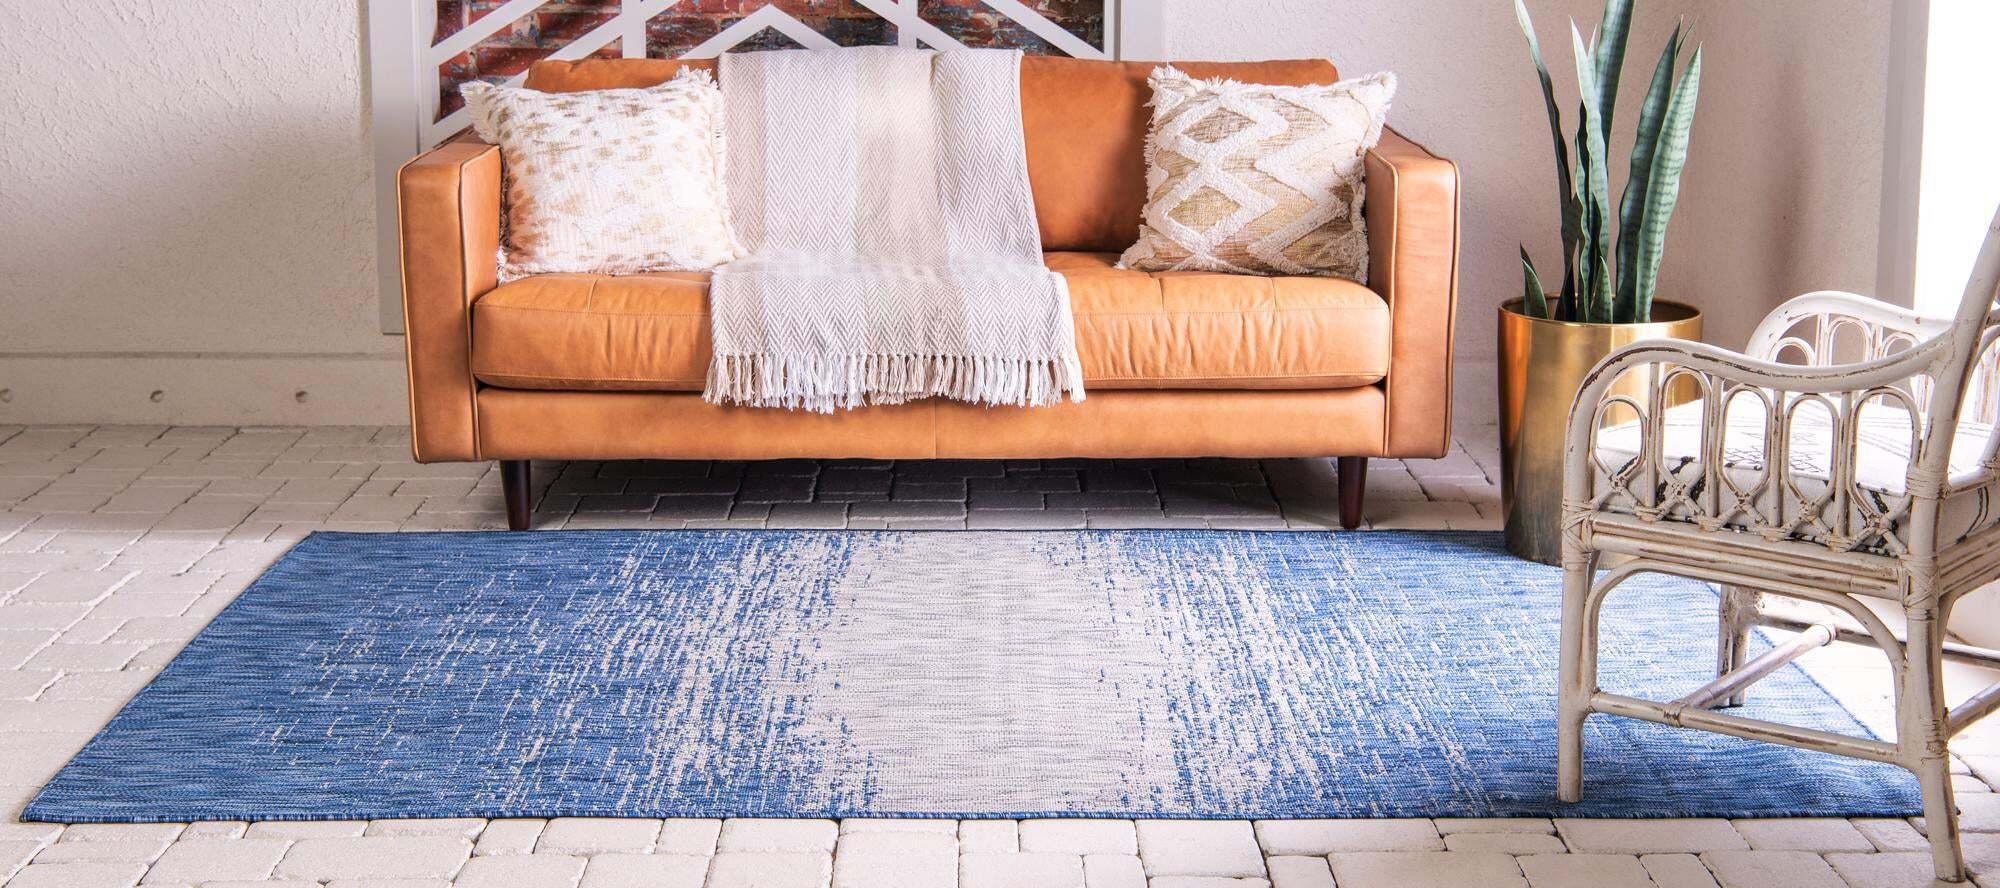 Unique Loom Outdoor Rugs - Outdoor Modern Abstract Rectangular 8x11 Rug Blue & Gray